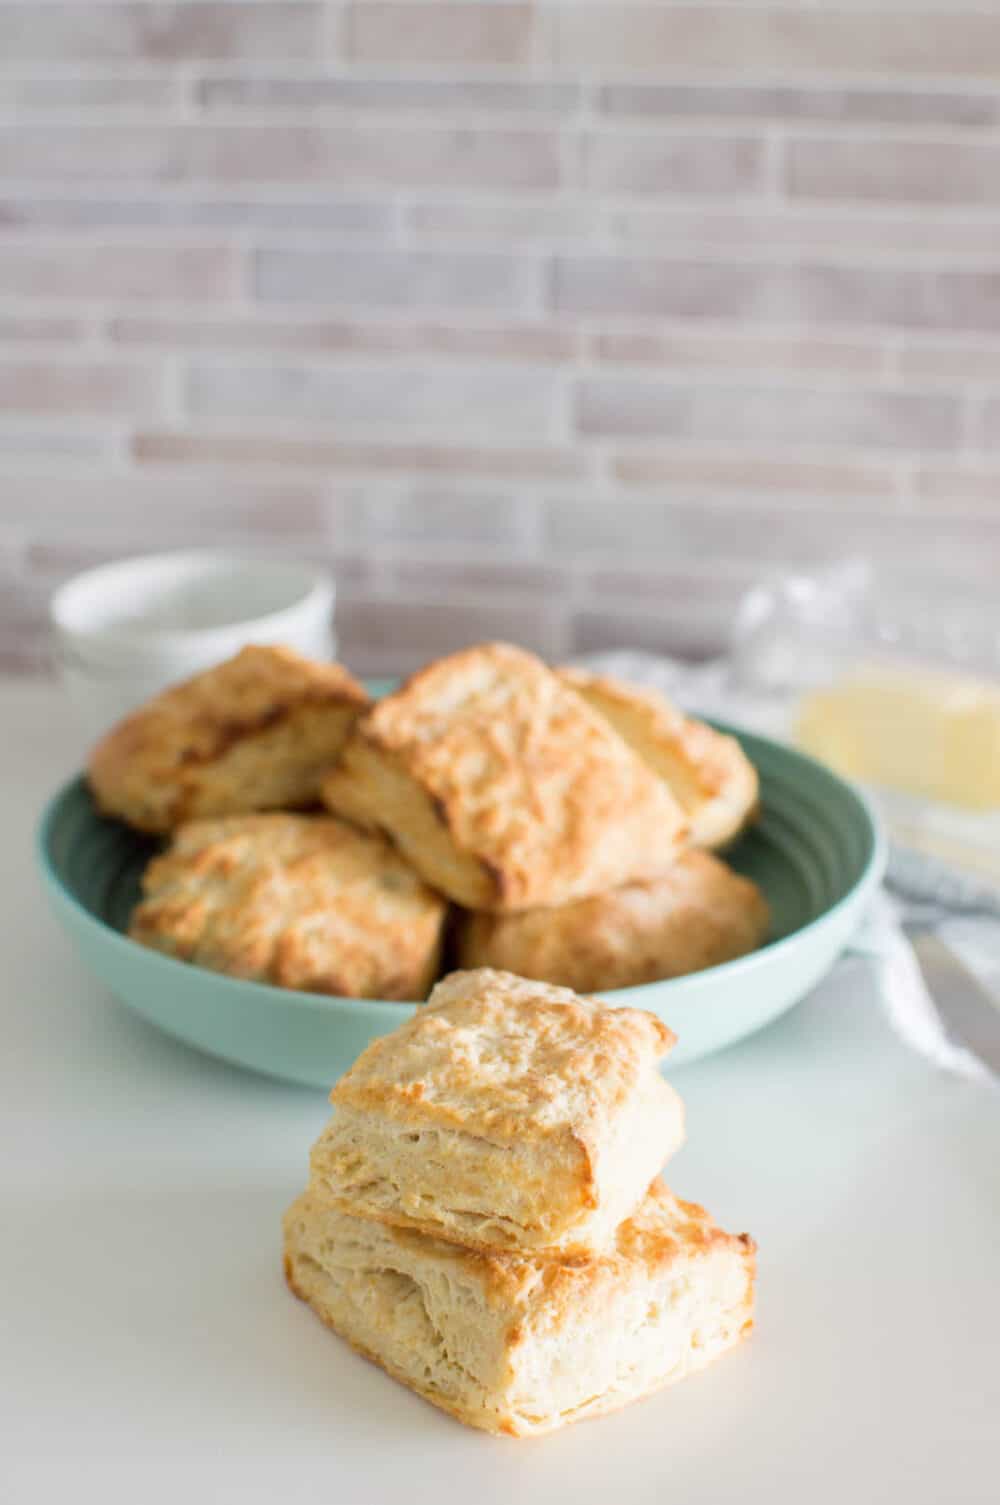 Two homemade biscuits stacked on each other with a bowl full of biscuits in the background